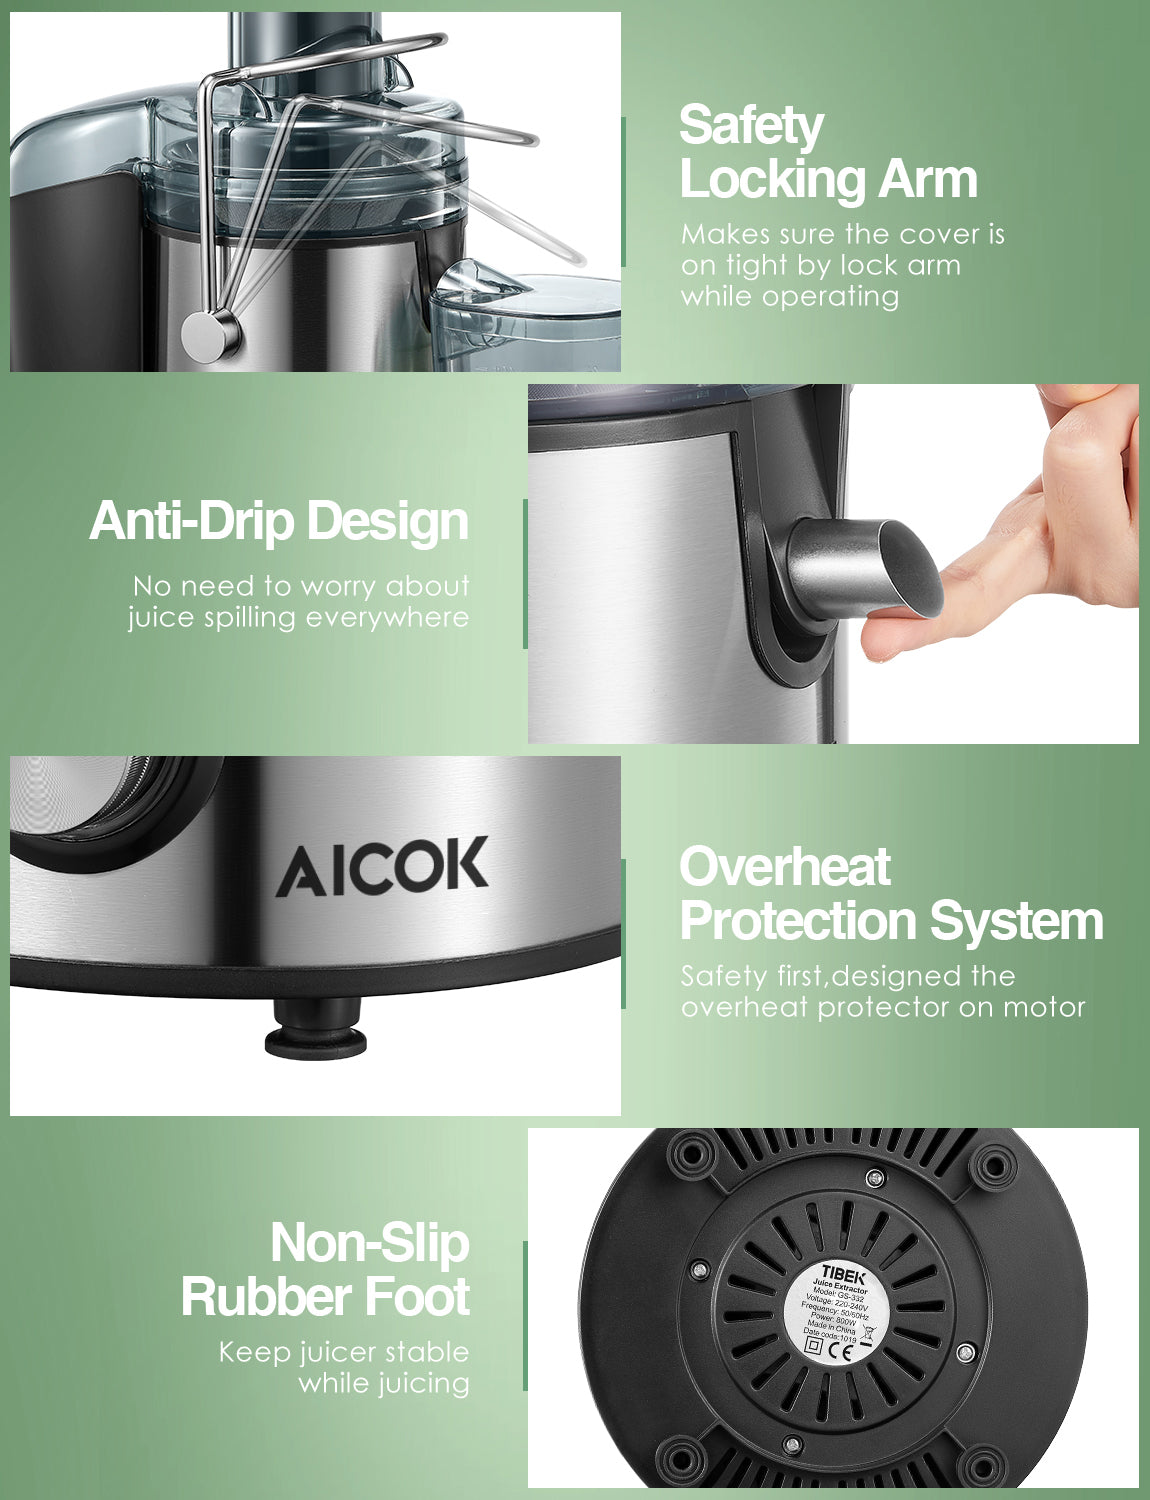 AICOK-Juicer, 800W Stainless Steel Juicer Machines GS-332, safety locking arm, overheat protection. robber foot